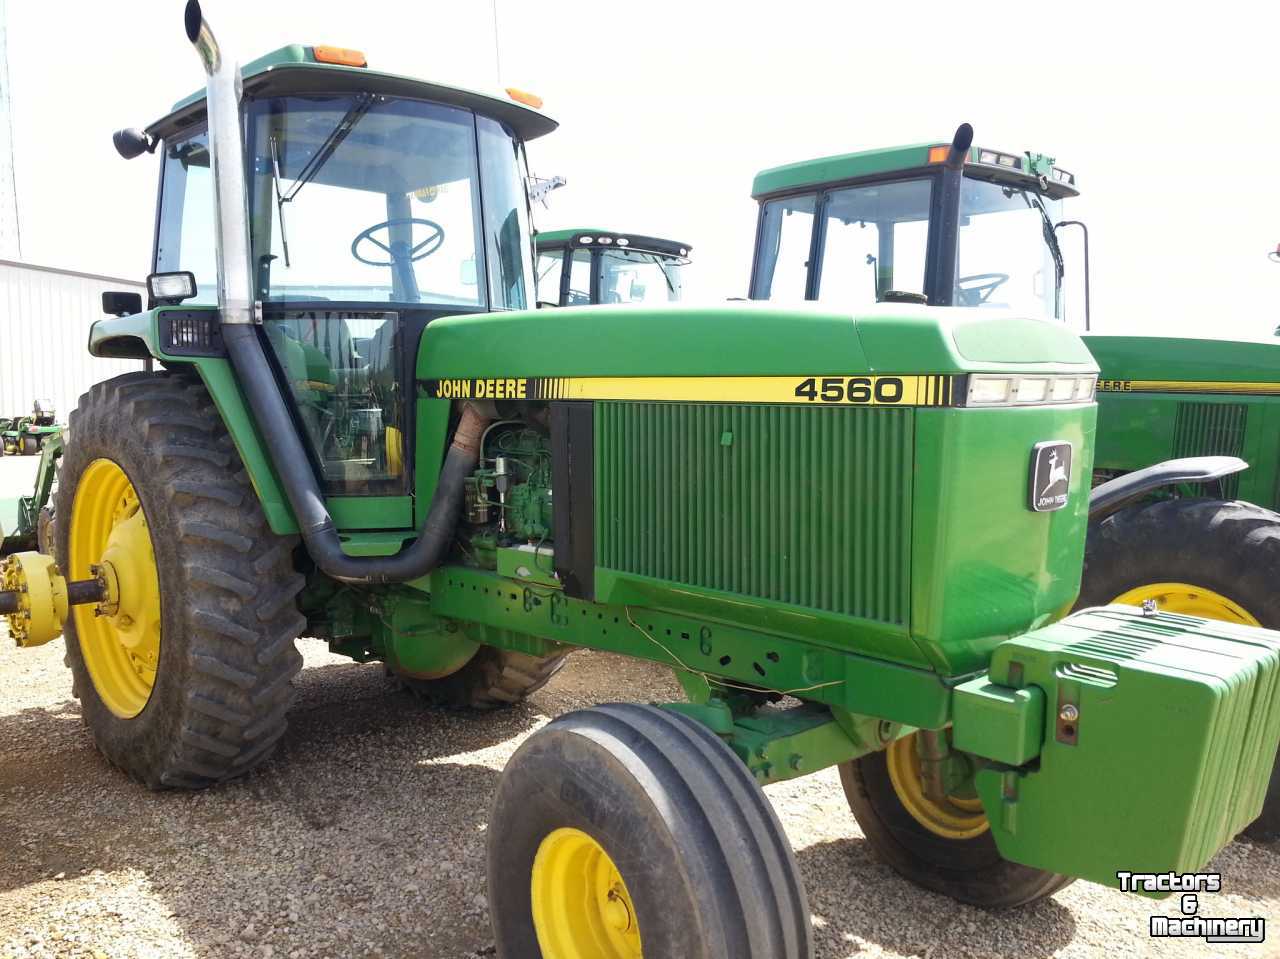 John Deere 4560 2WD PS POWERSHIFT TRACTOR - Used Tractors - 1993 - IL ...